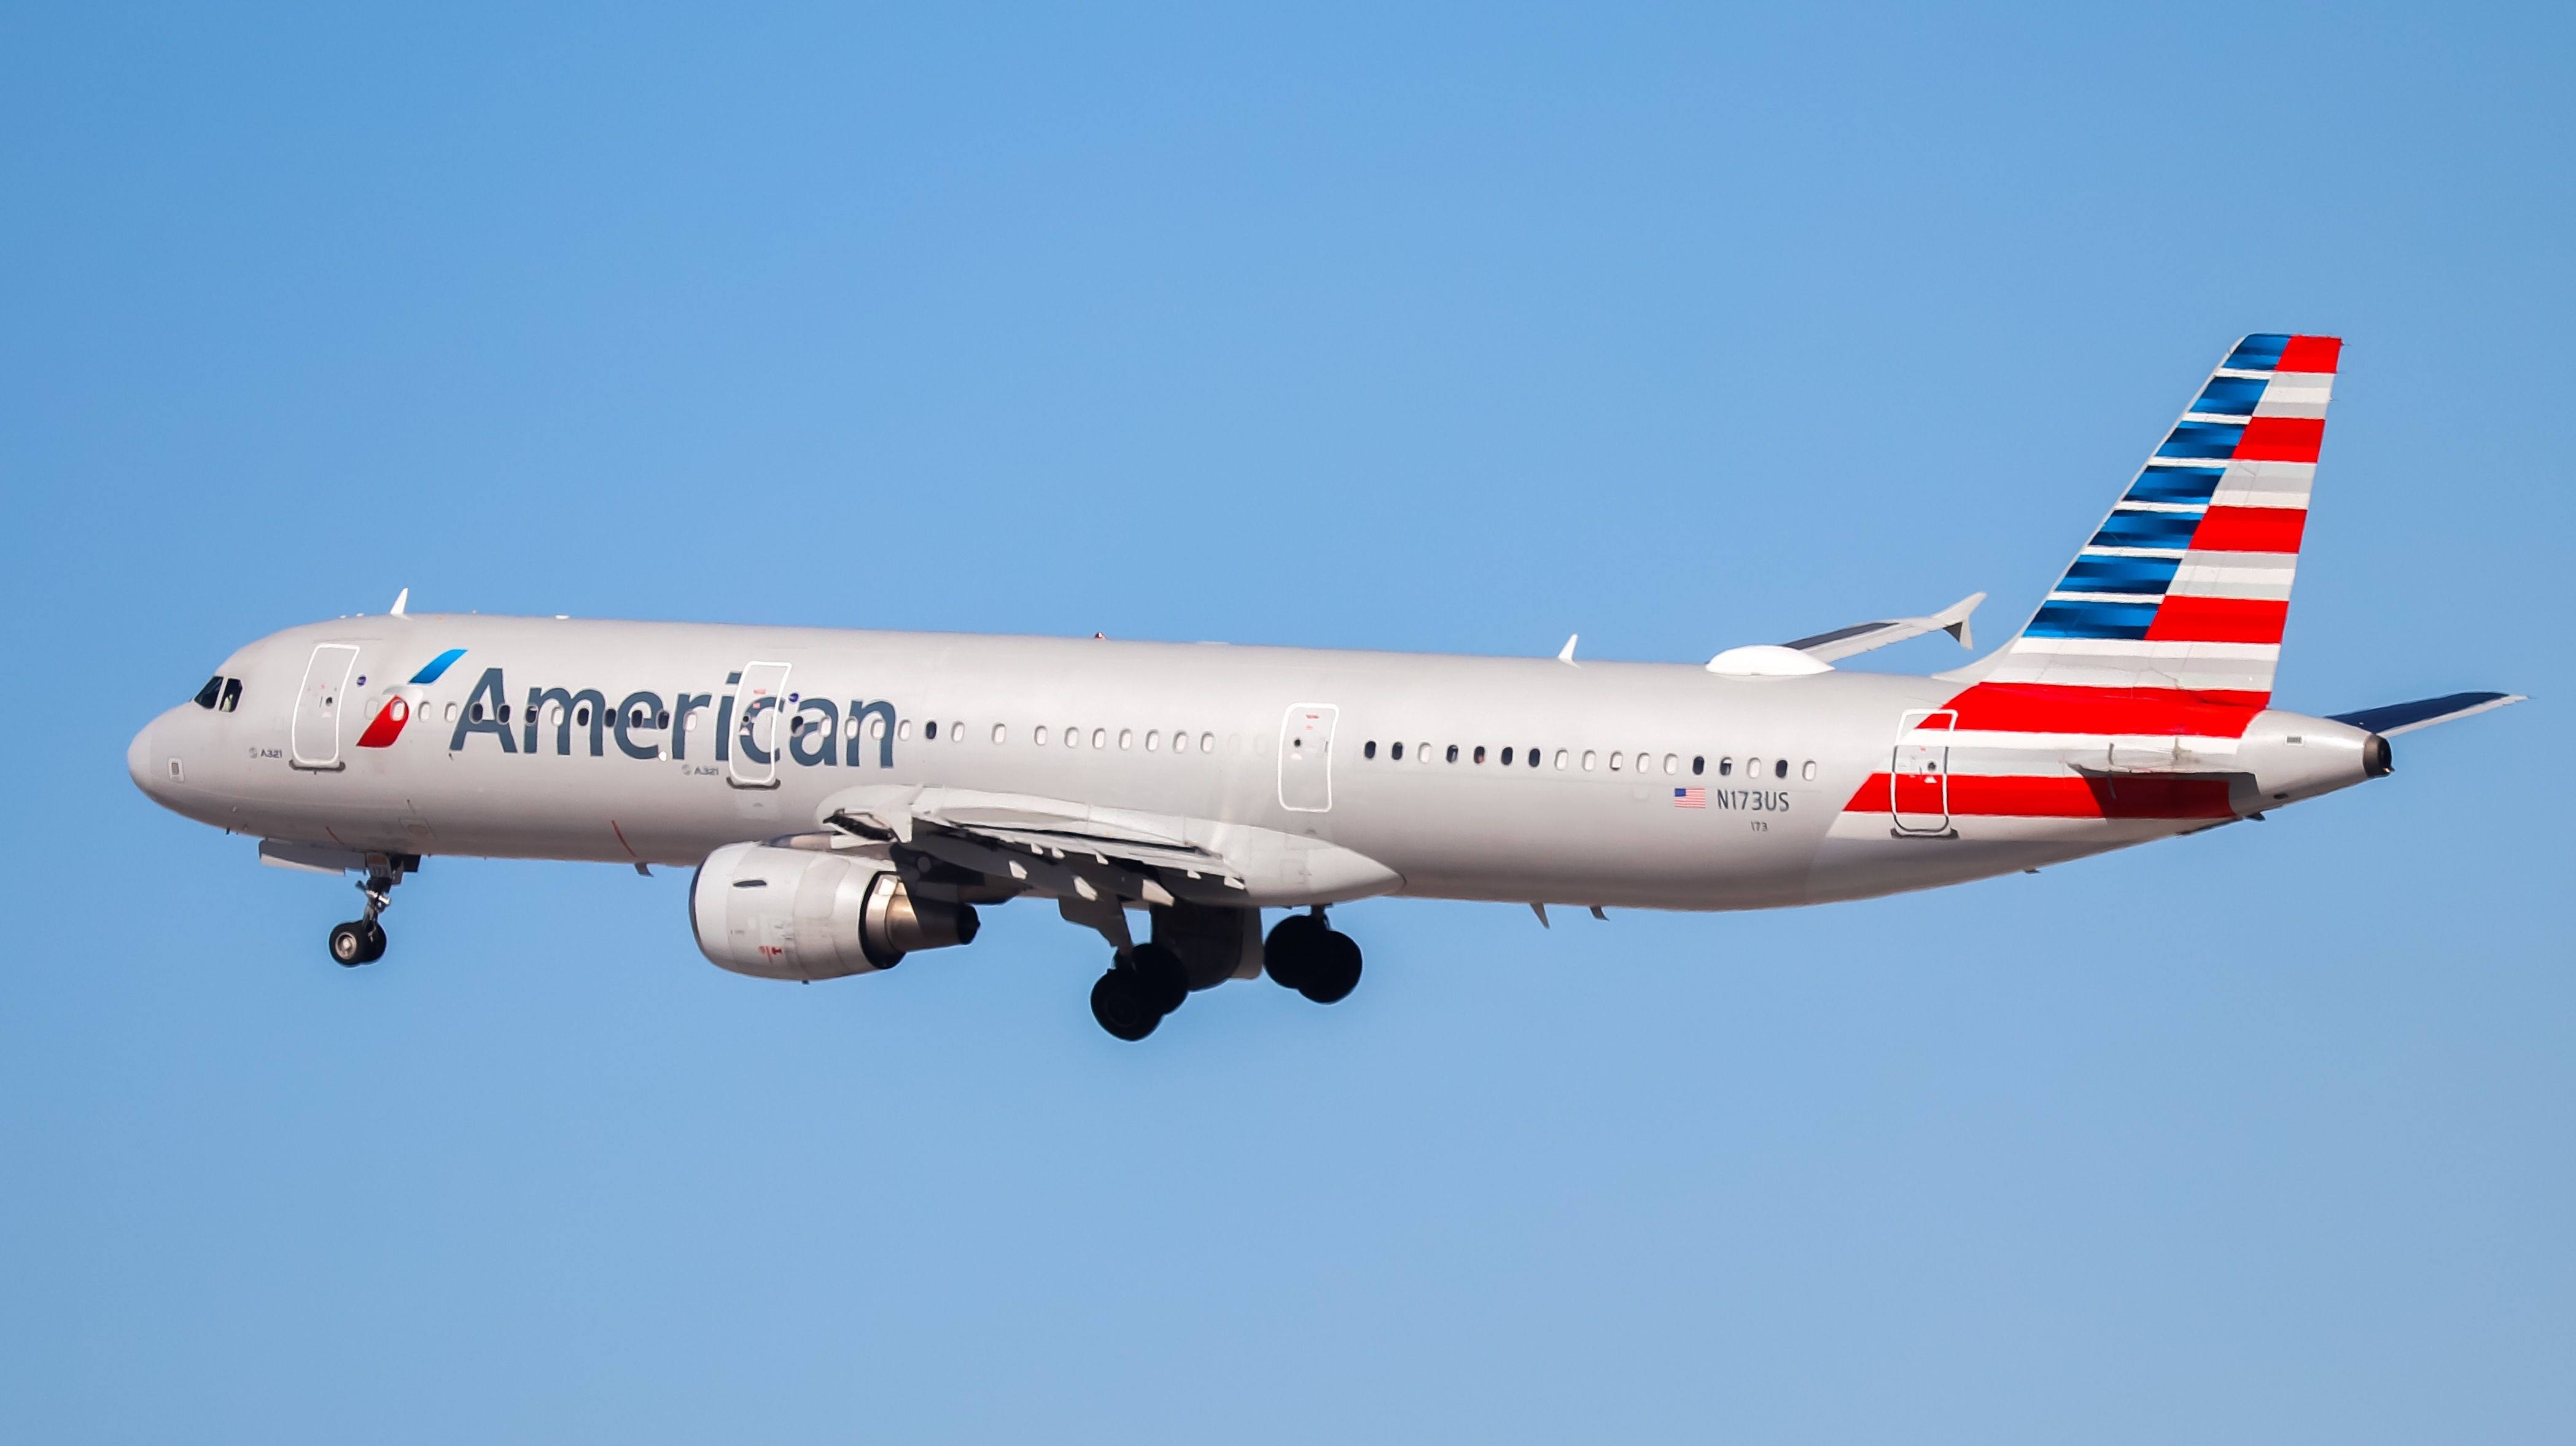 American Airlines A321 take off